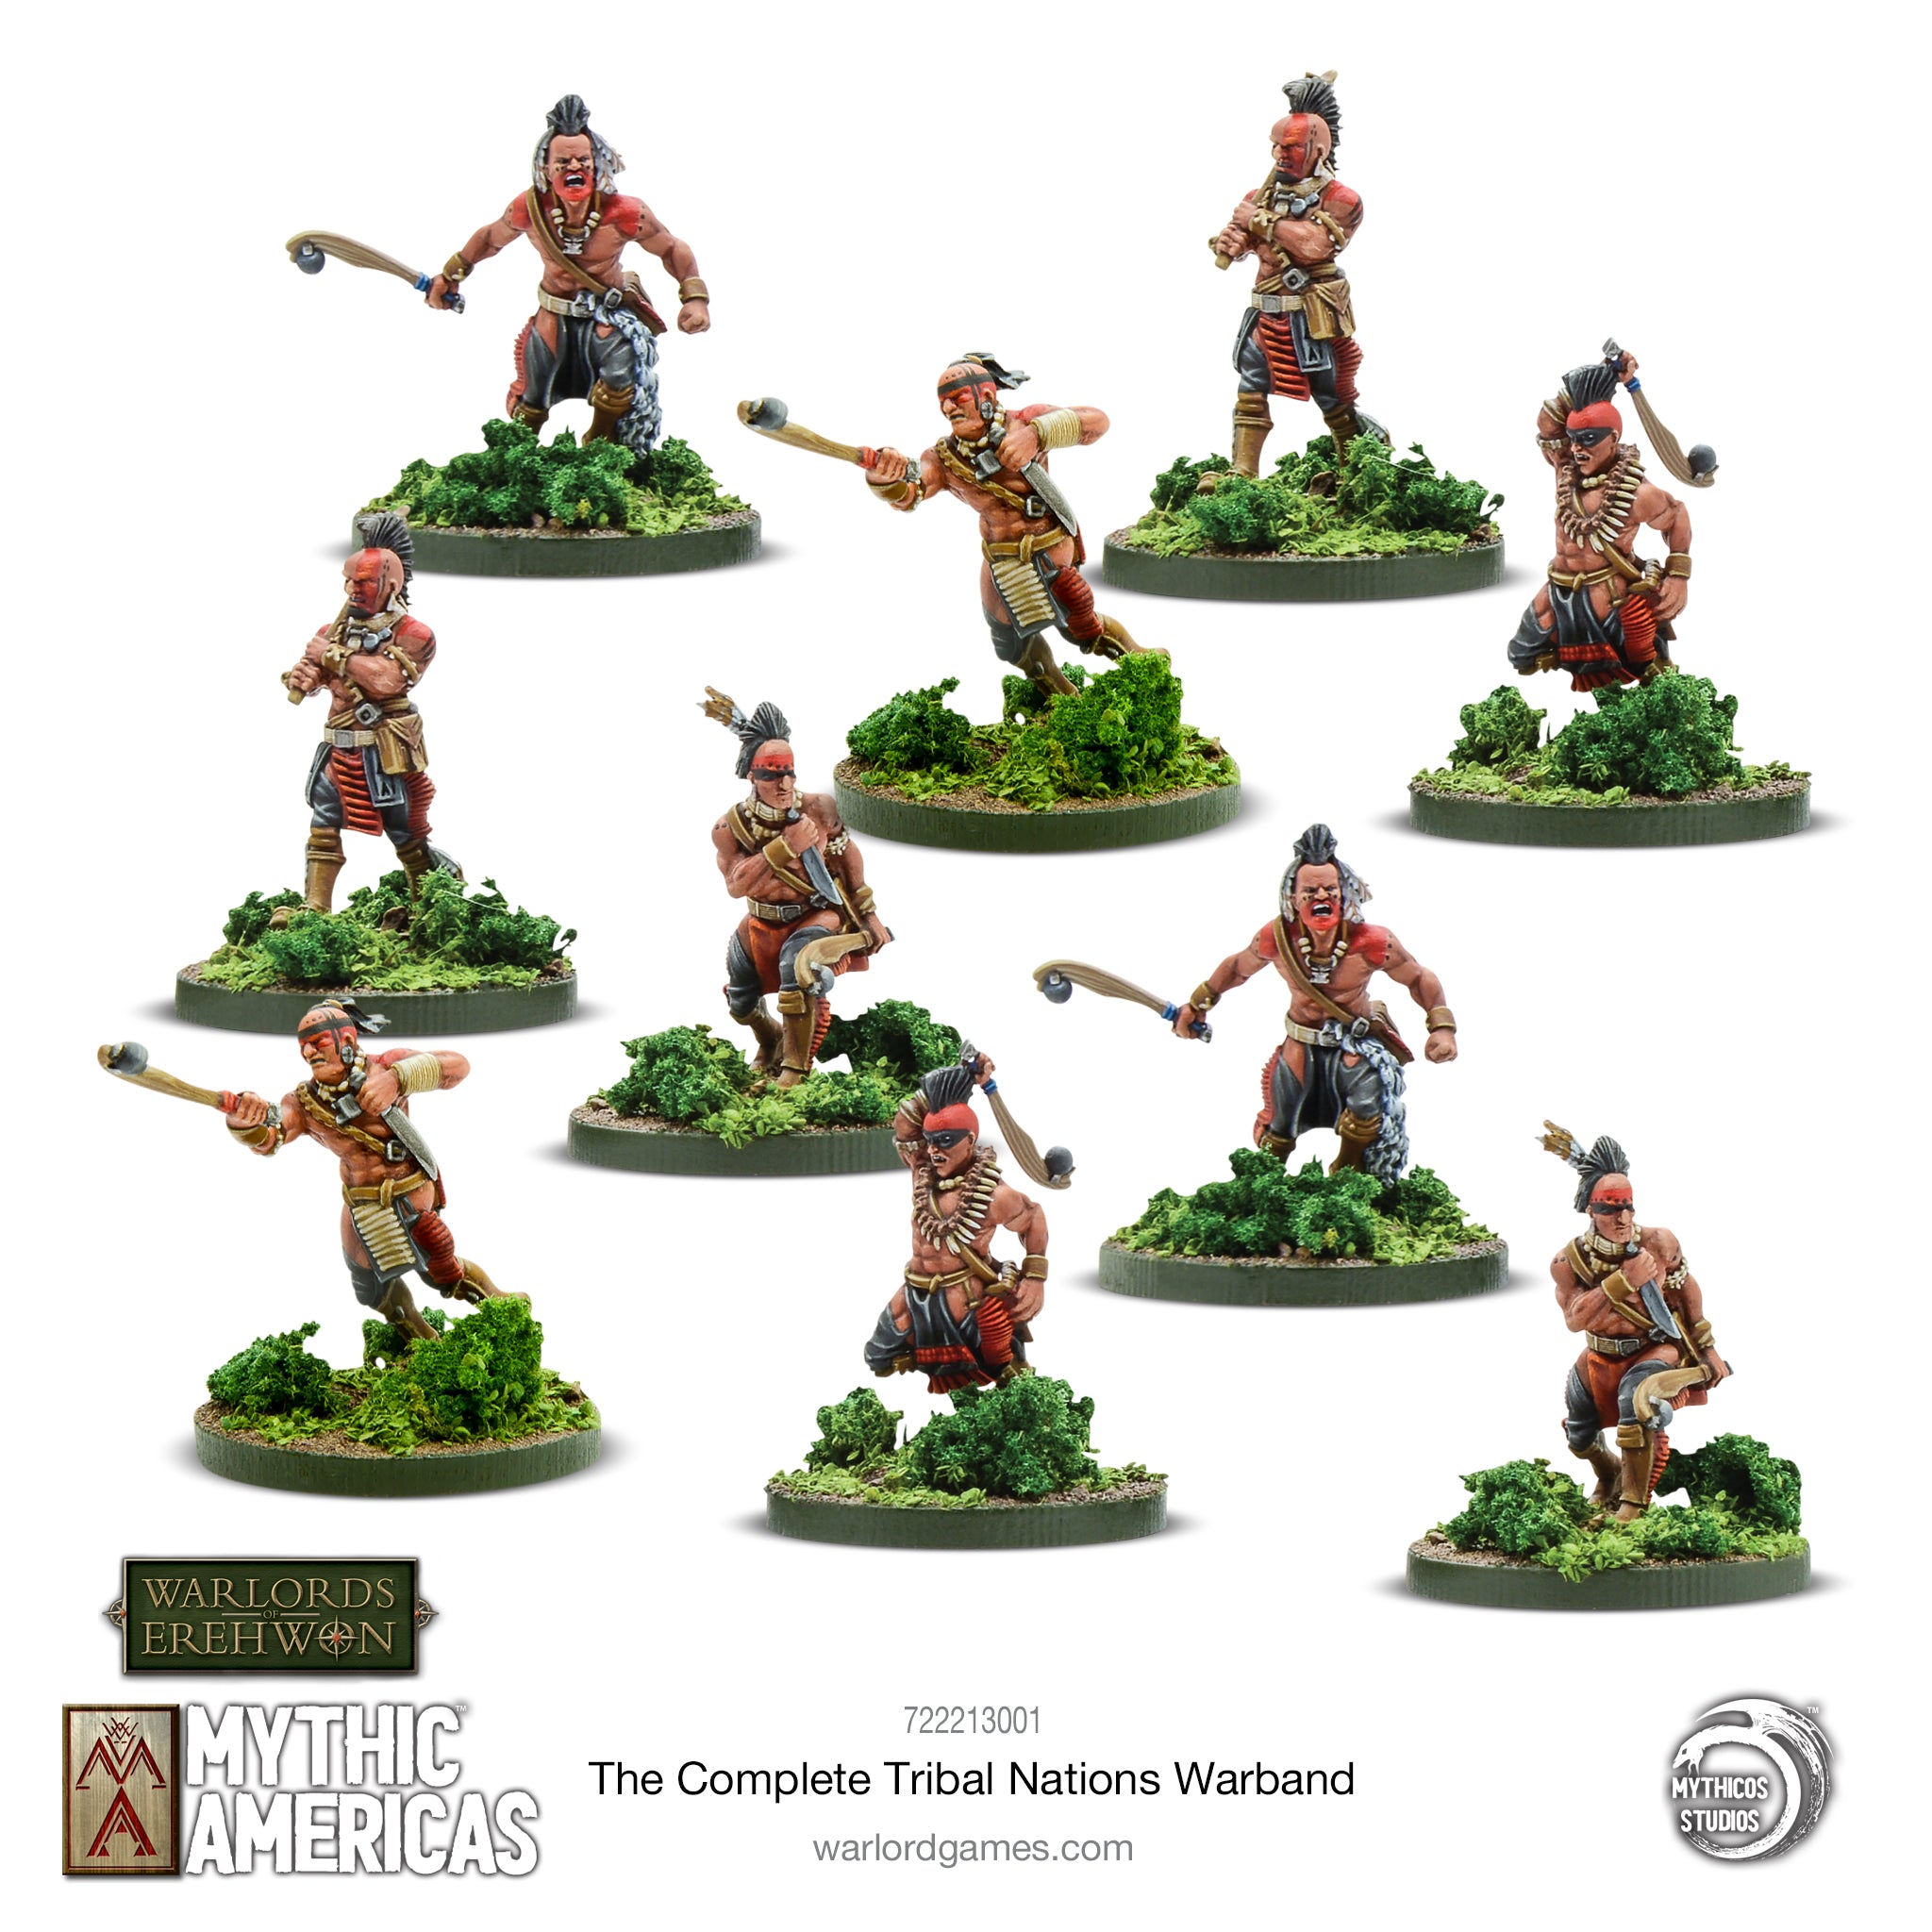 The Complete Tribal Nations Warband